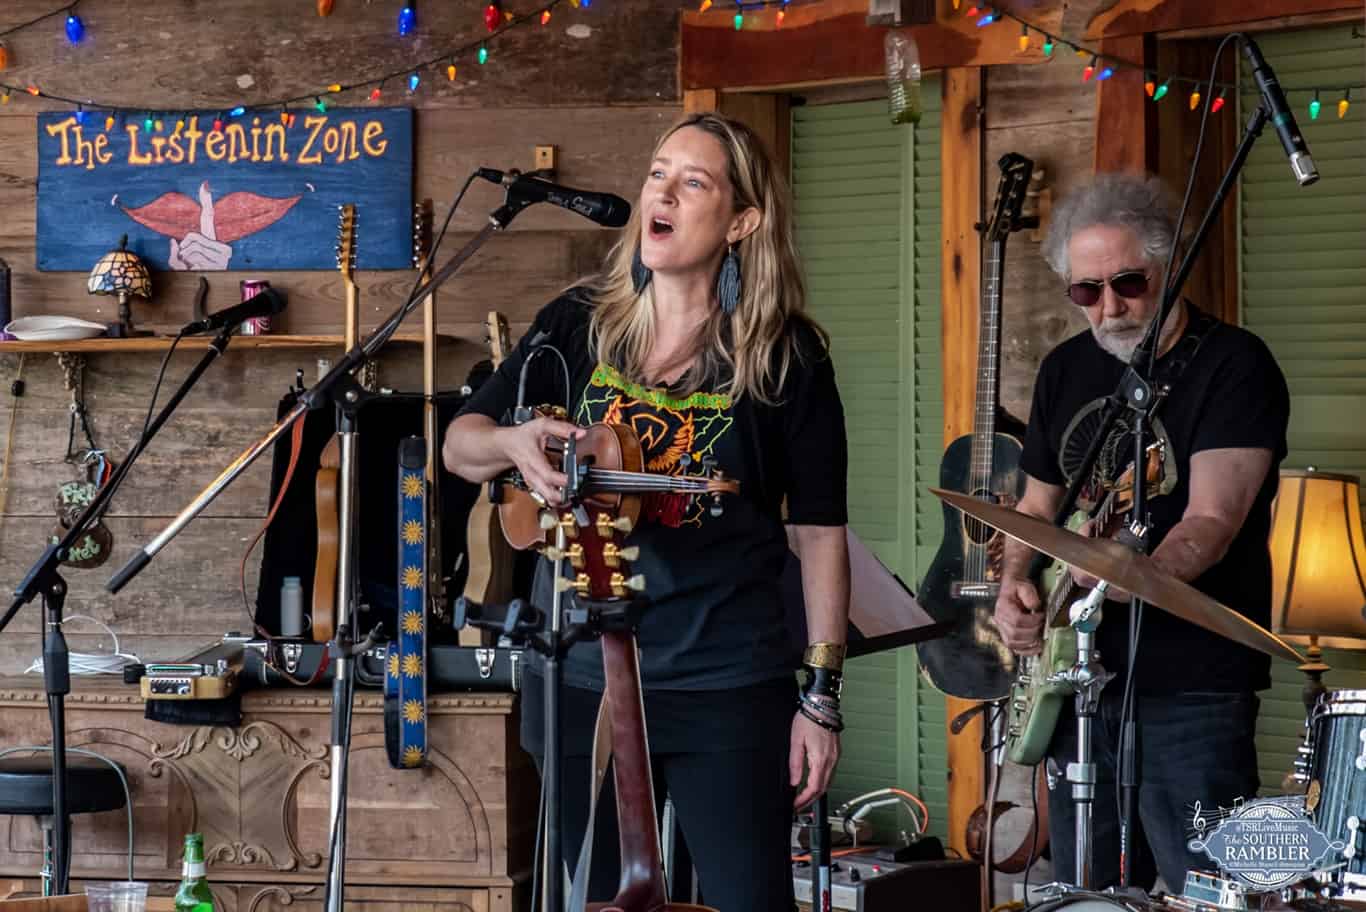 Live Music with The Southern Rambler | The Frog Pond Sunday Social